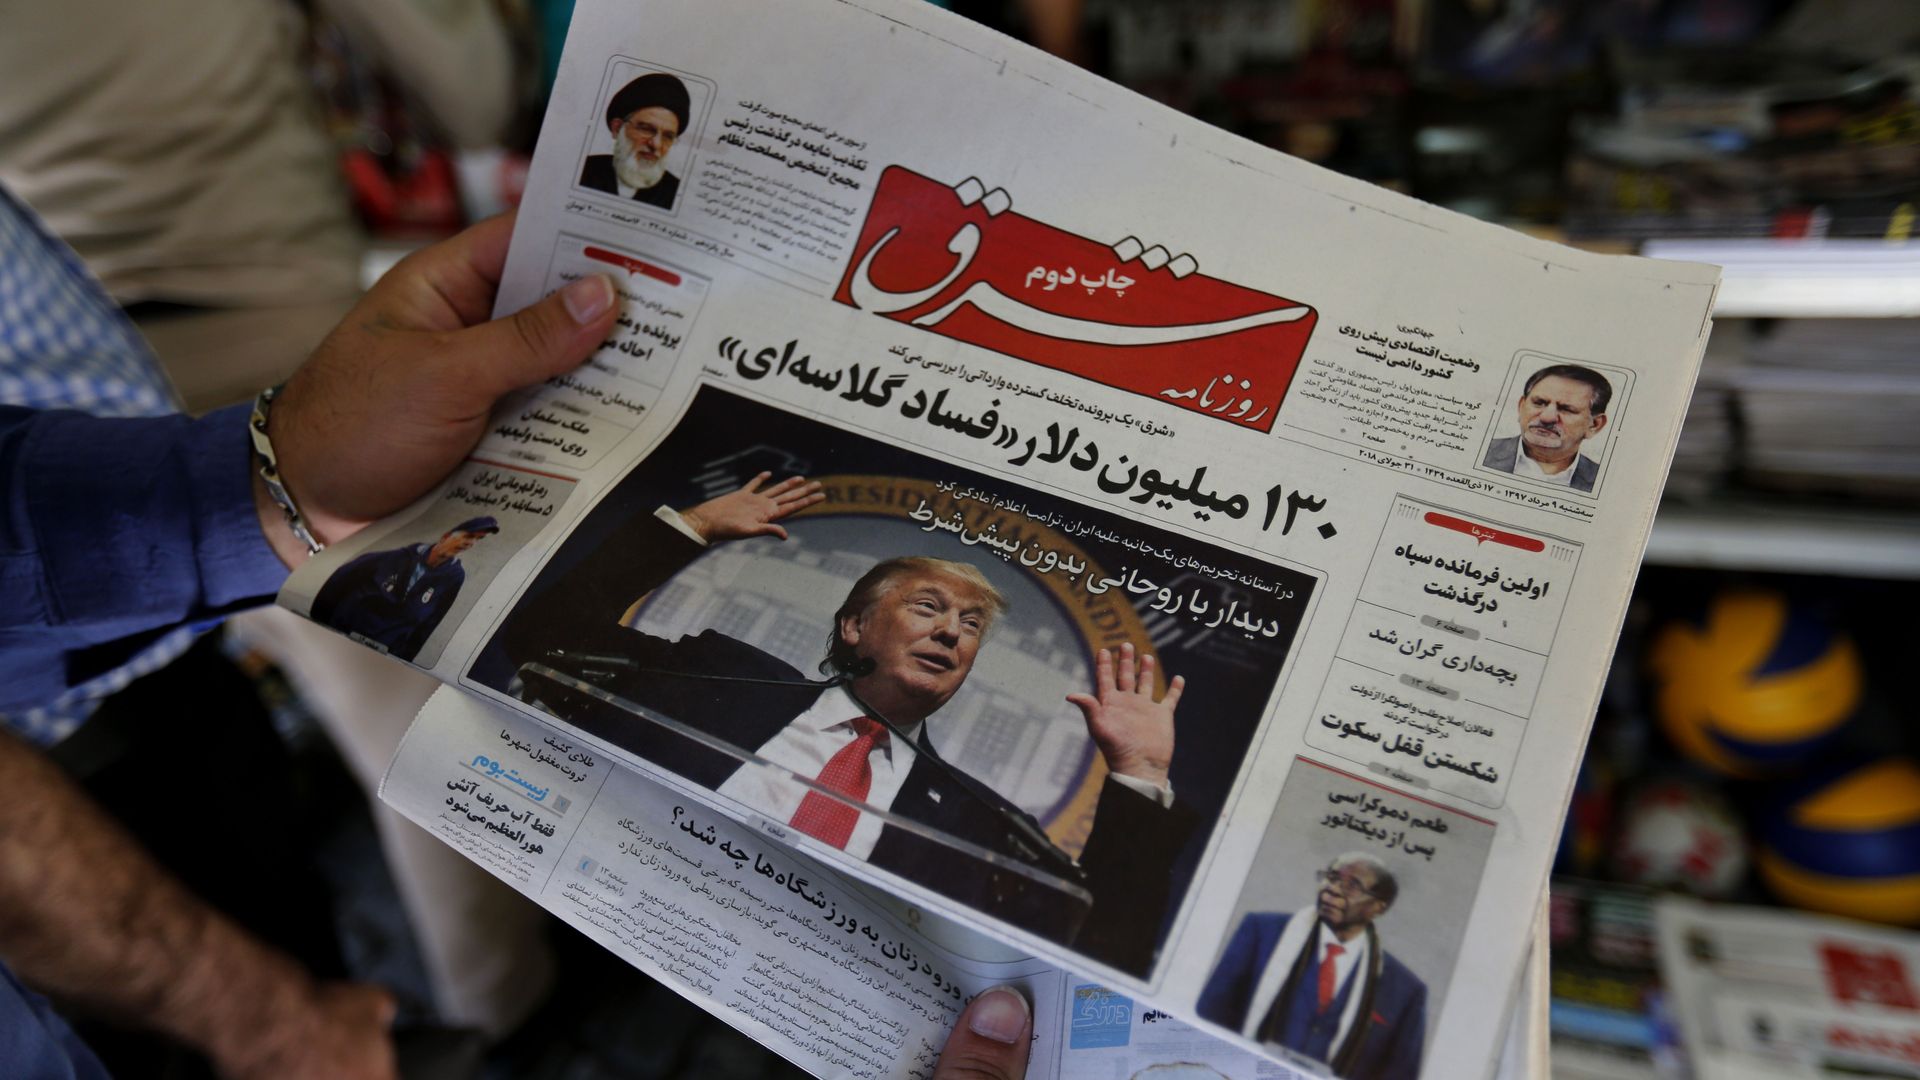 A man takes a glance at a newspaper with a picture of US president Donald Trump on the front page, in the capital Tehran on July 31, 2018.